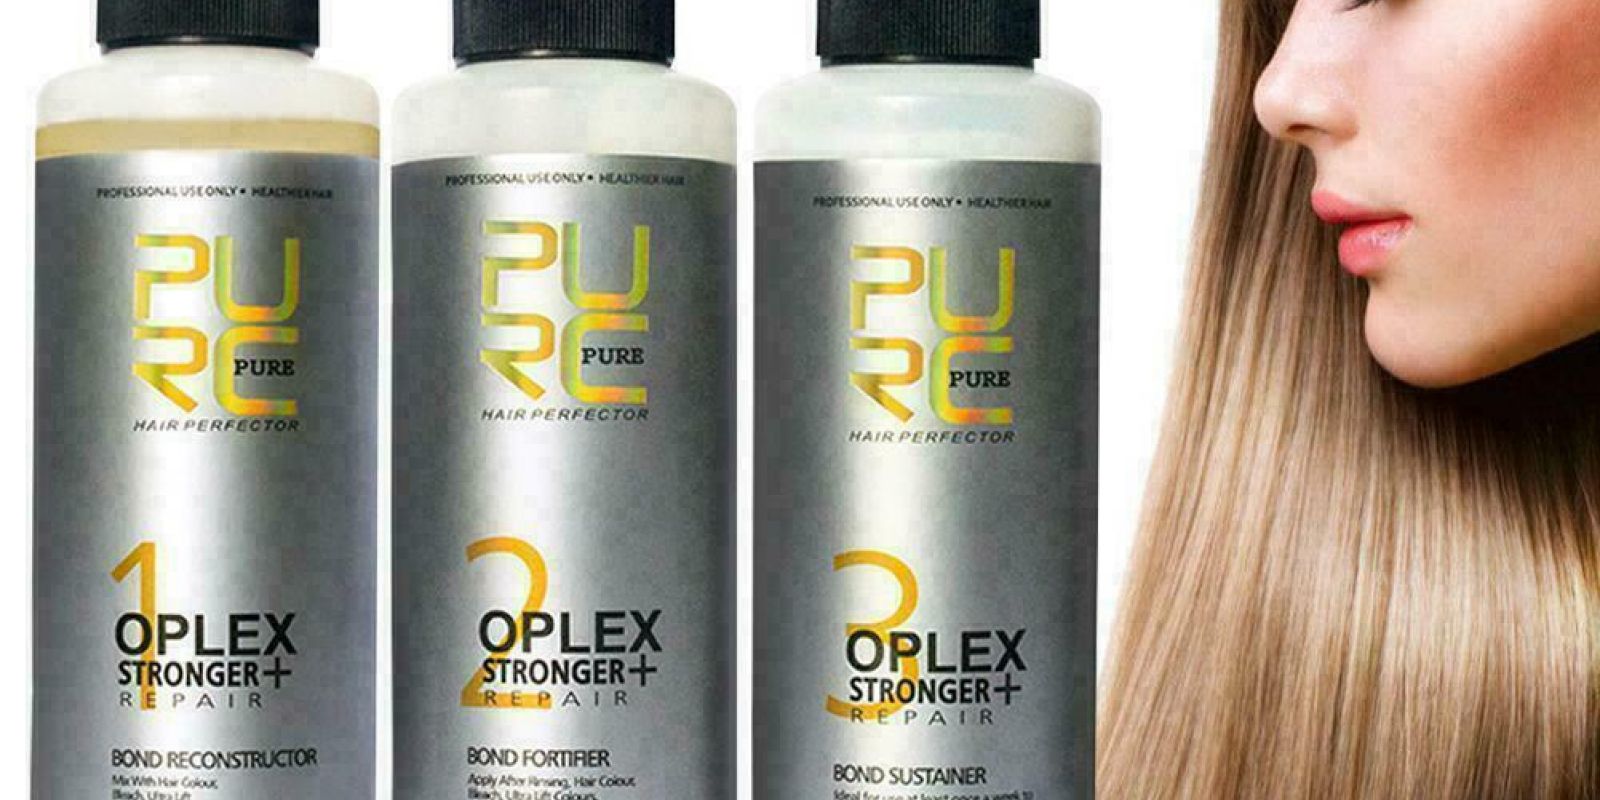 PURC Oplex Repair & Reconstructor Kit Is Everything Your Hair Needs! purcoplex 5a6fba4f